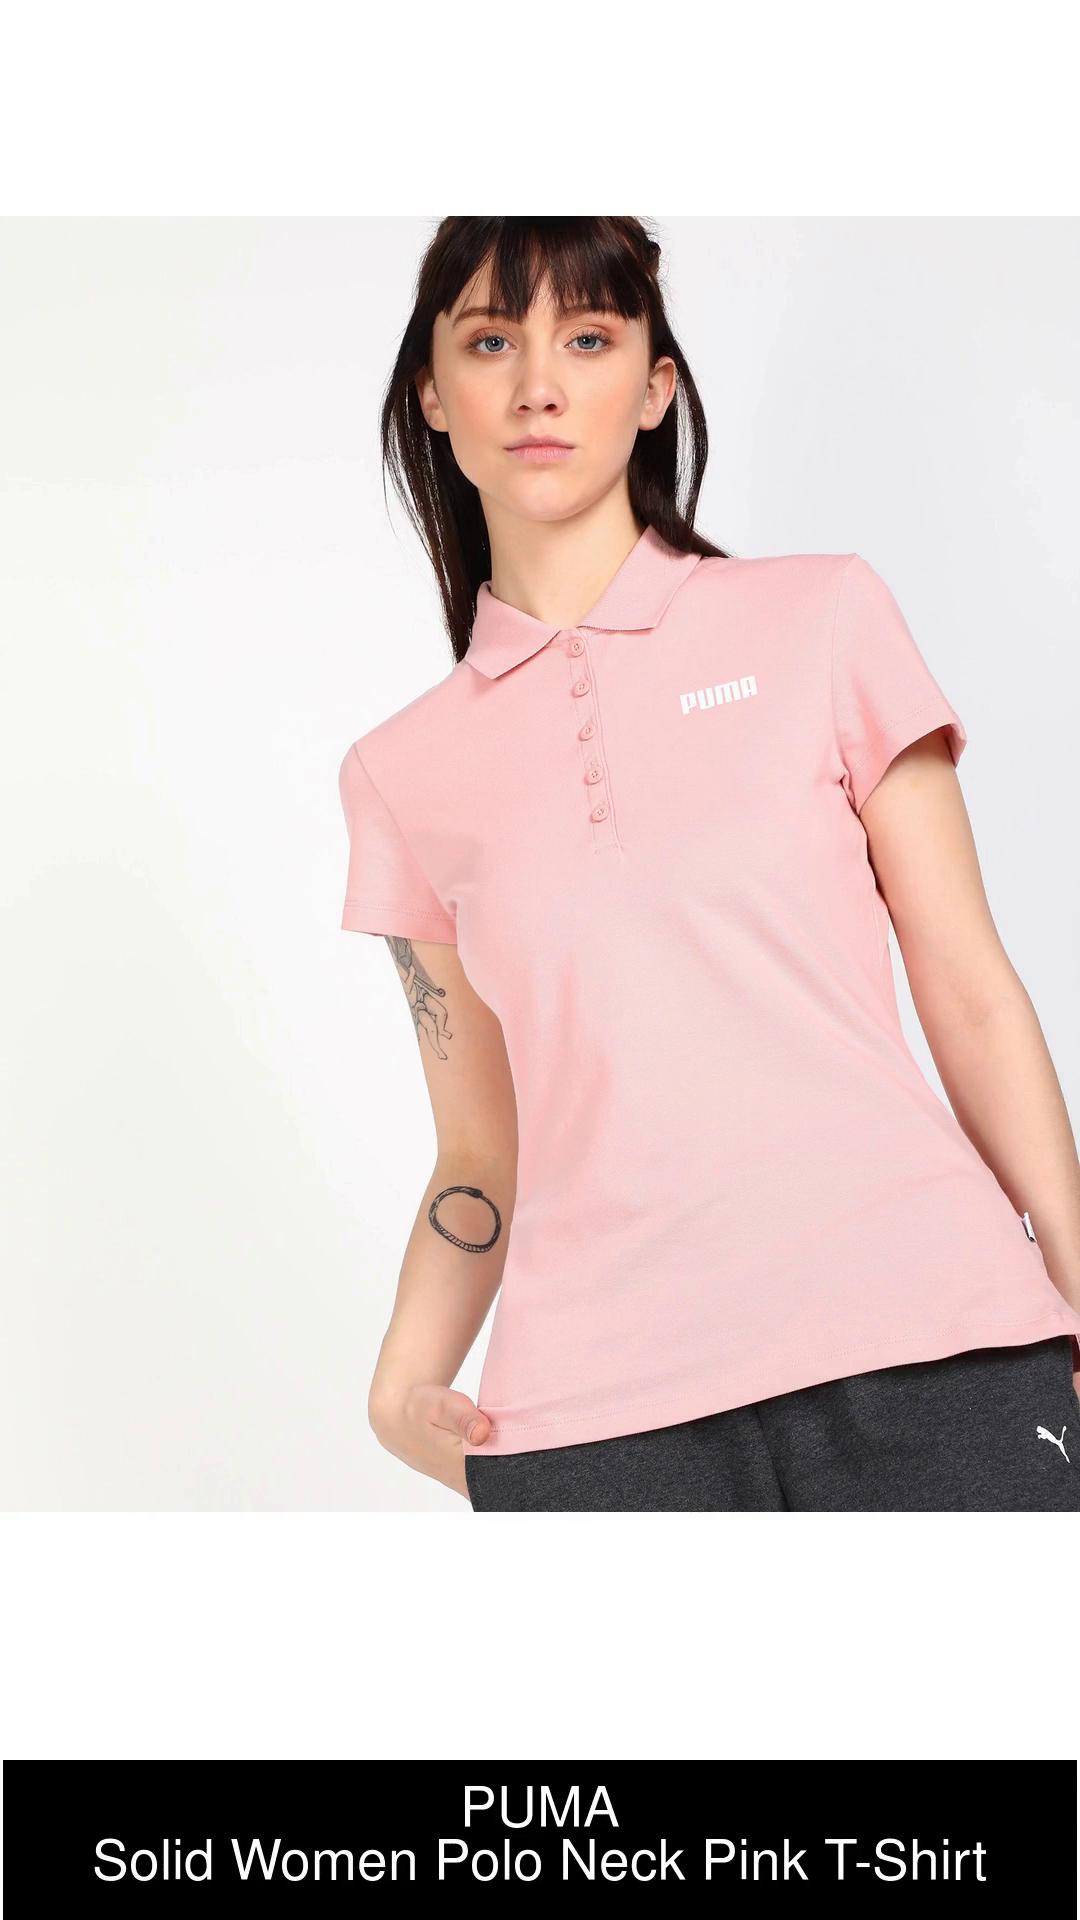 Neck - Solid India Best PUMA Polo Polo T-Shirt Buy Solid T-Shirt Pink Women in Neck at Women Online PUMA Prices Pink